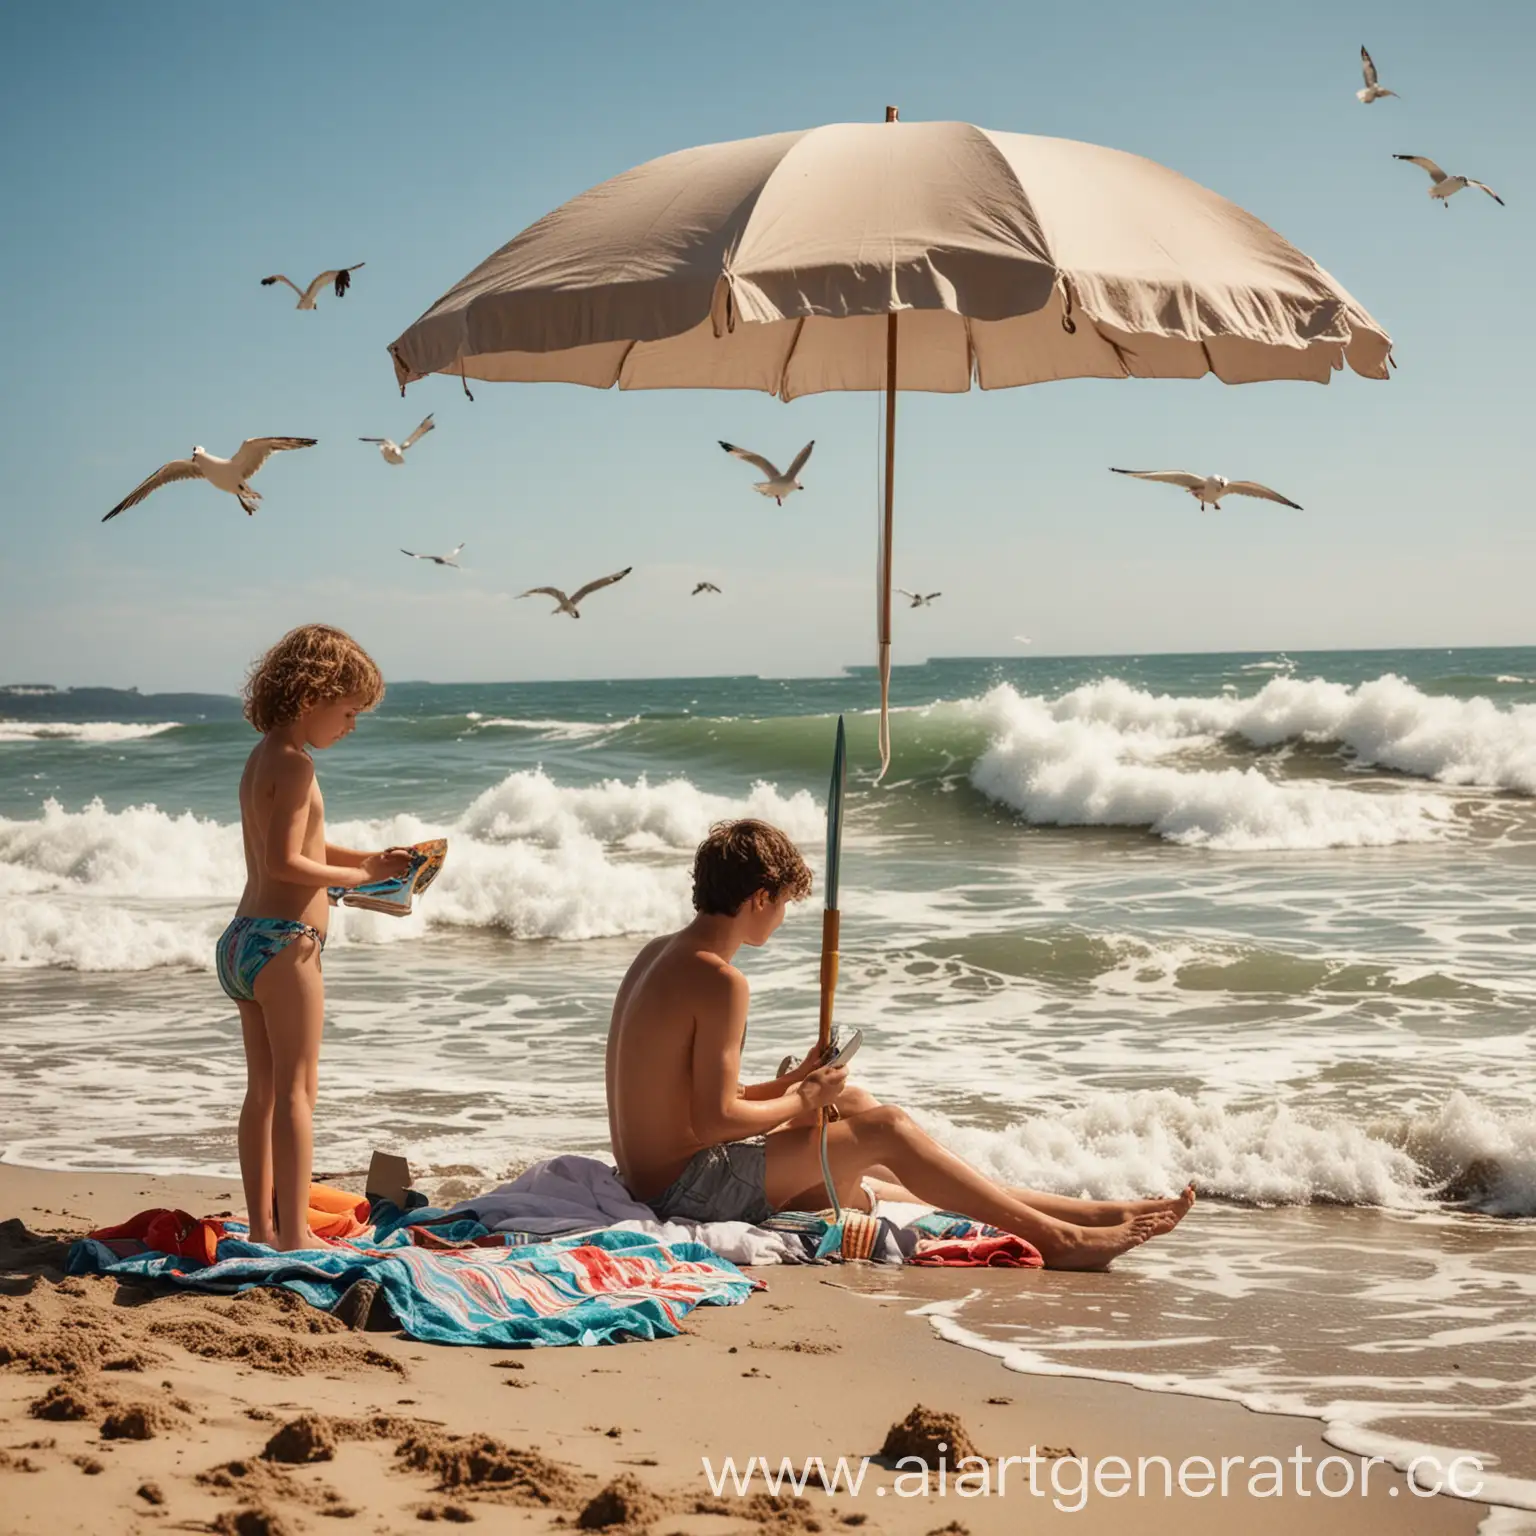 Sunny day at the beach. The waves are crashing against the shore; seagulls are flying overhead. Umbrella and beach towels near the water. Boy is building a sandcastle, and woman, men are reading, girl is swimming